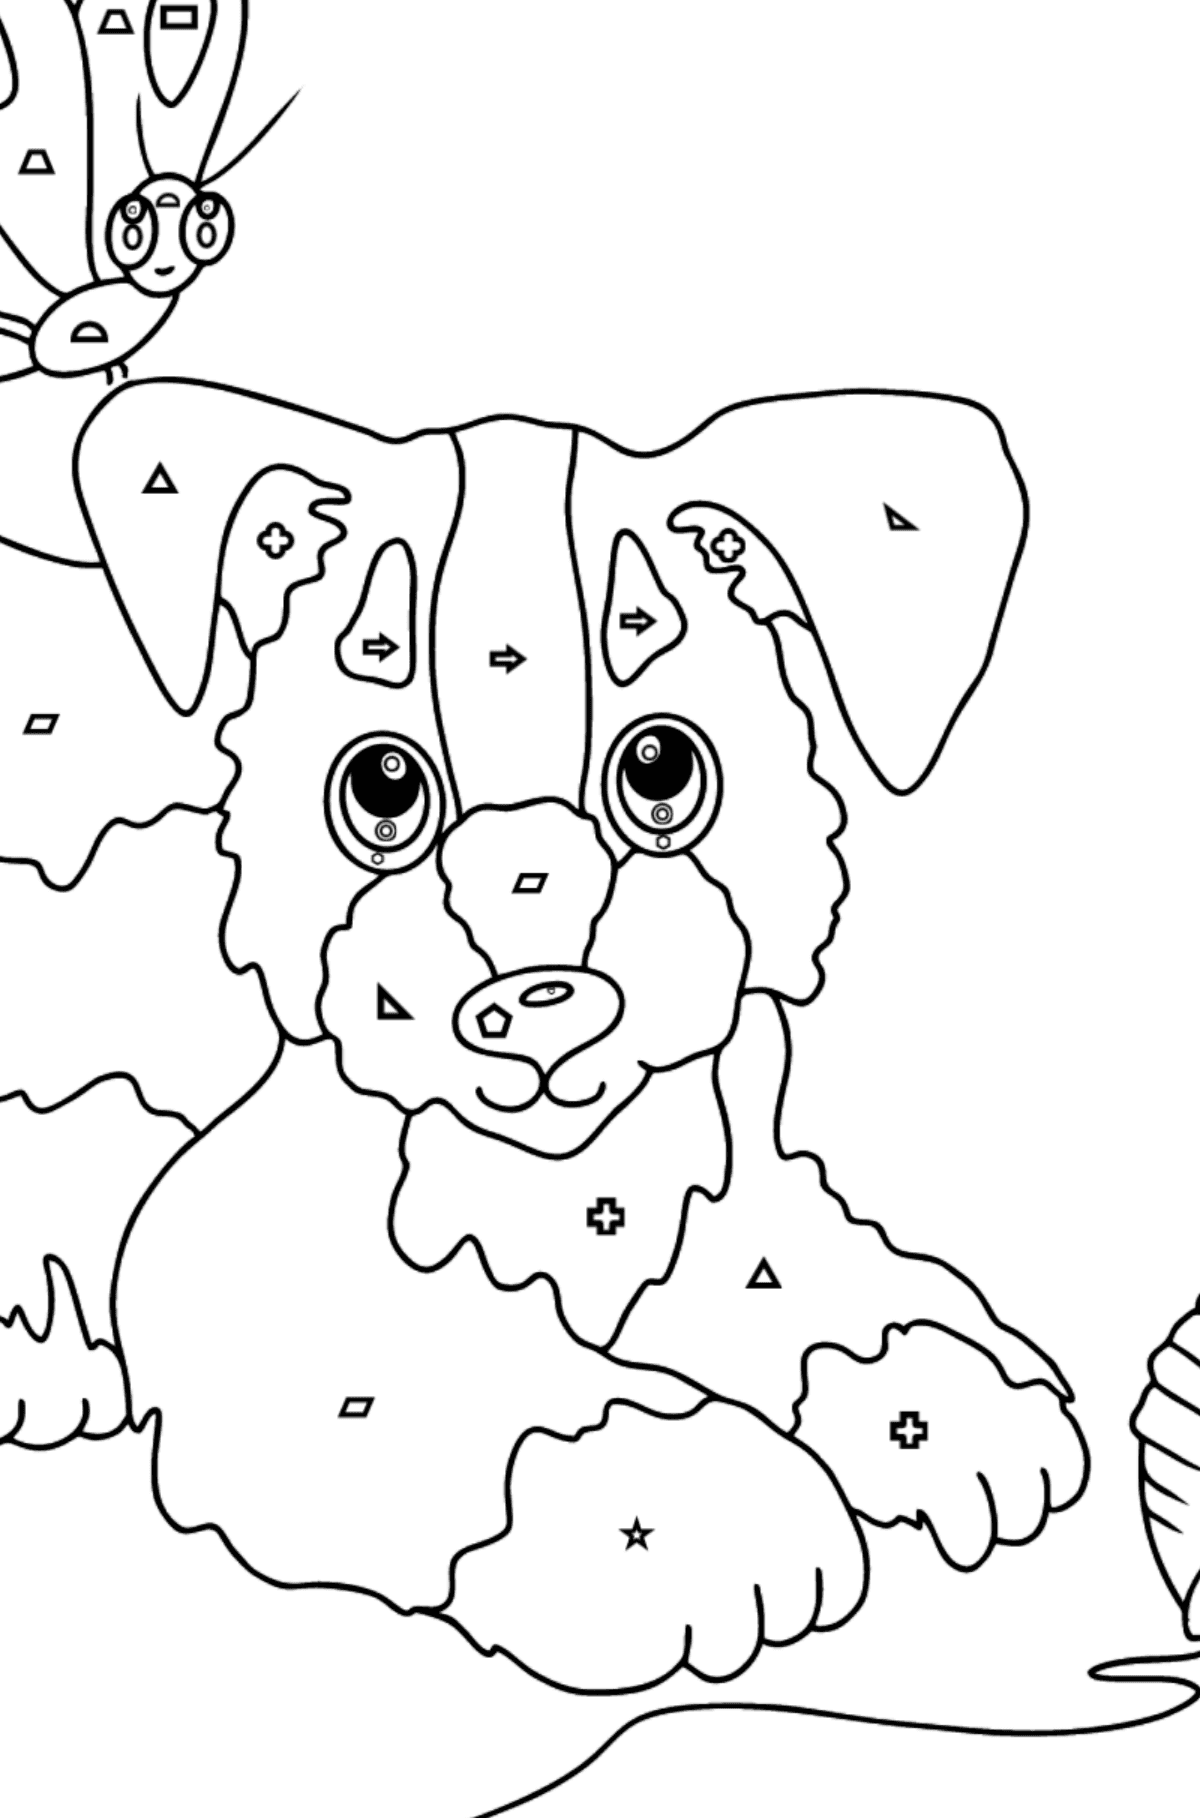 Coloring Page - A Dog is Playing with a Ball of Yarn and Butterflies - Coloring by Geometric Shapes for Kids